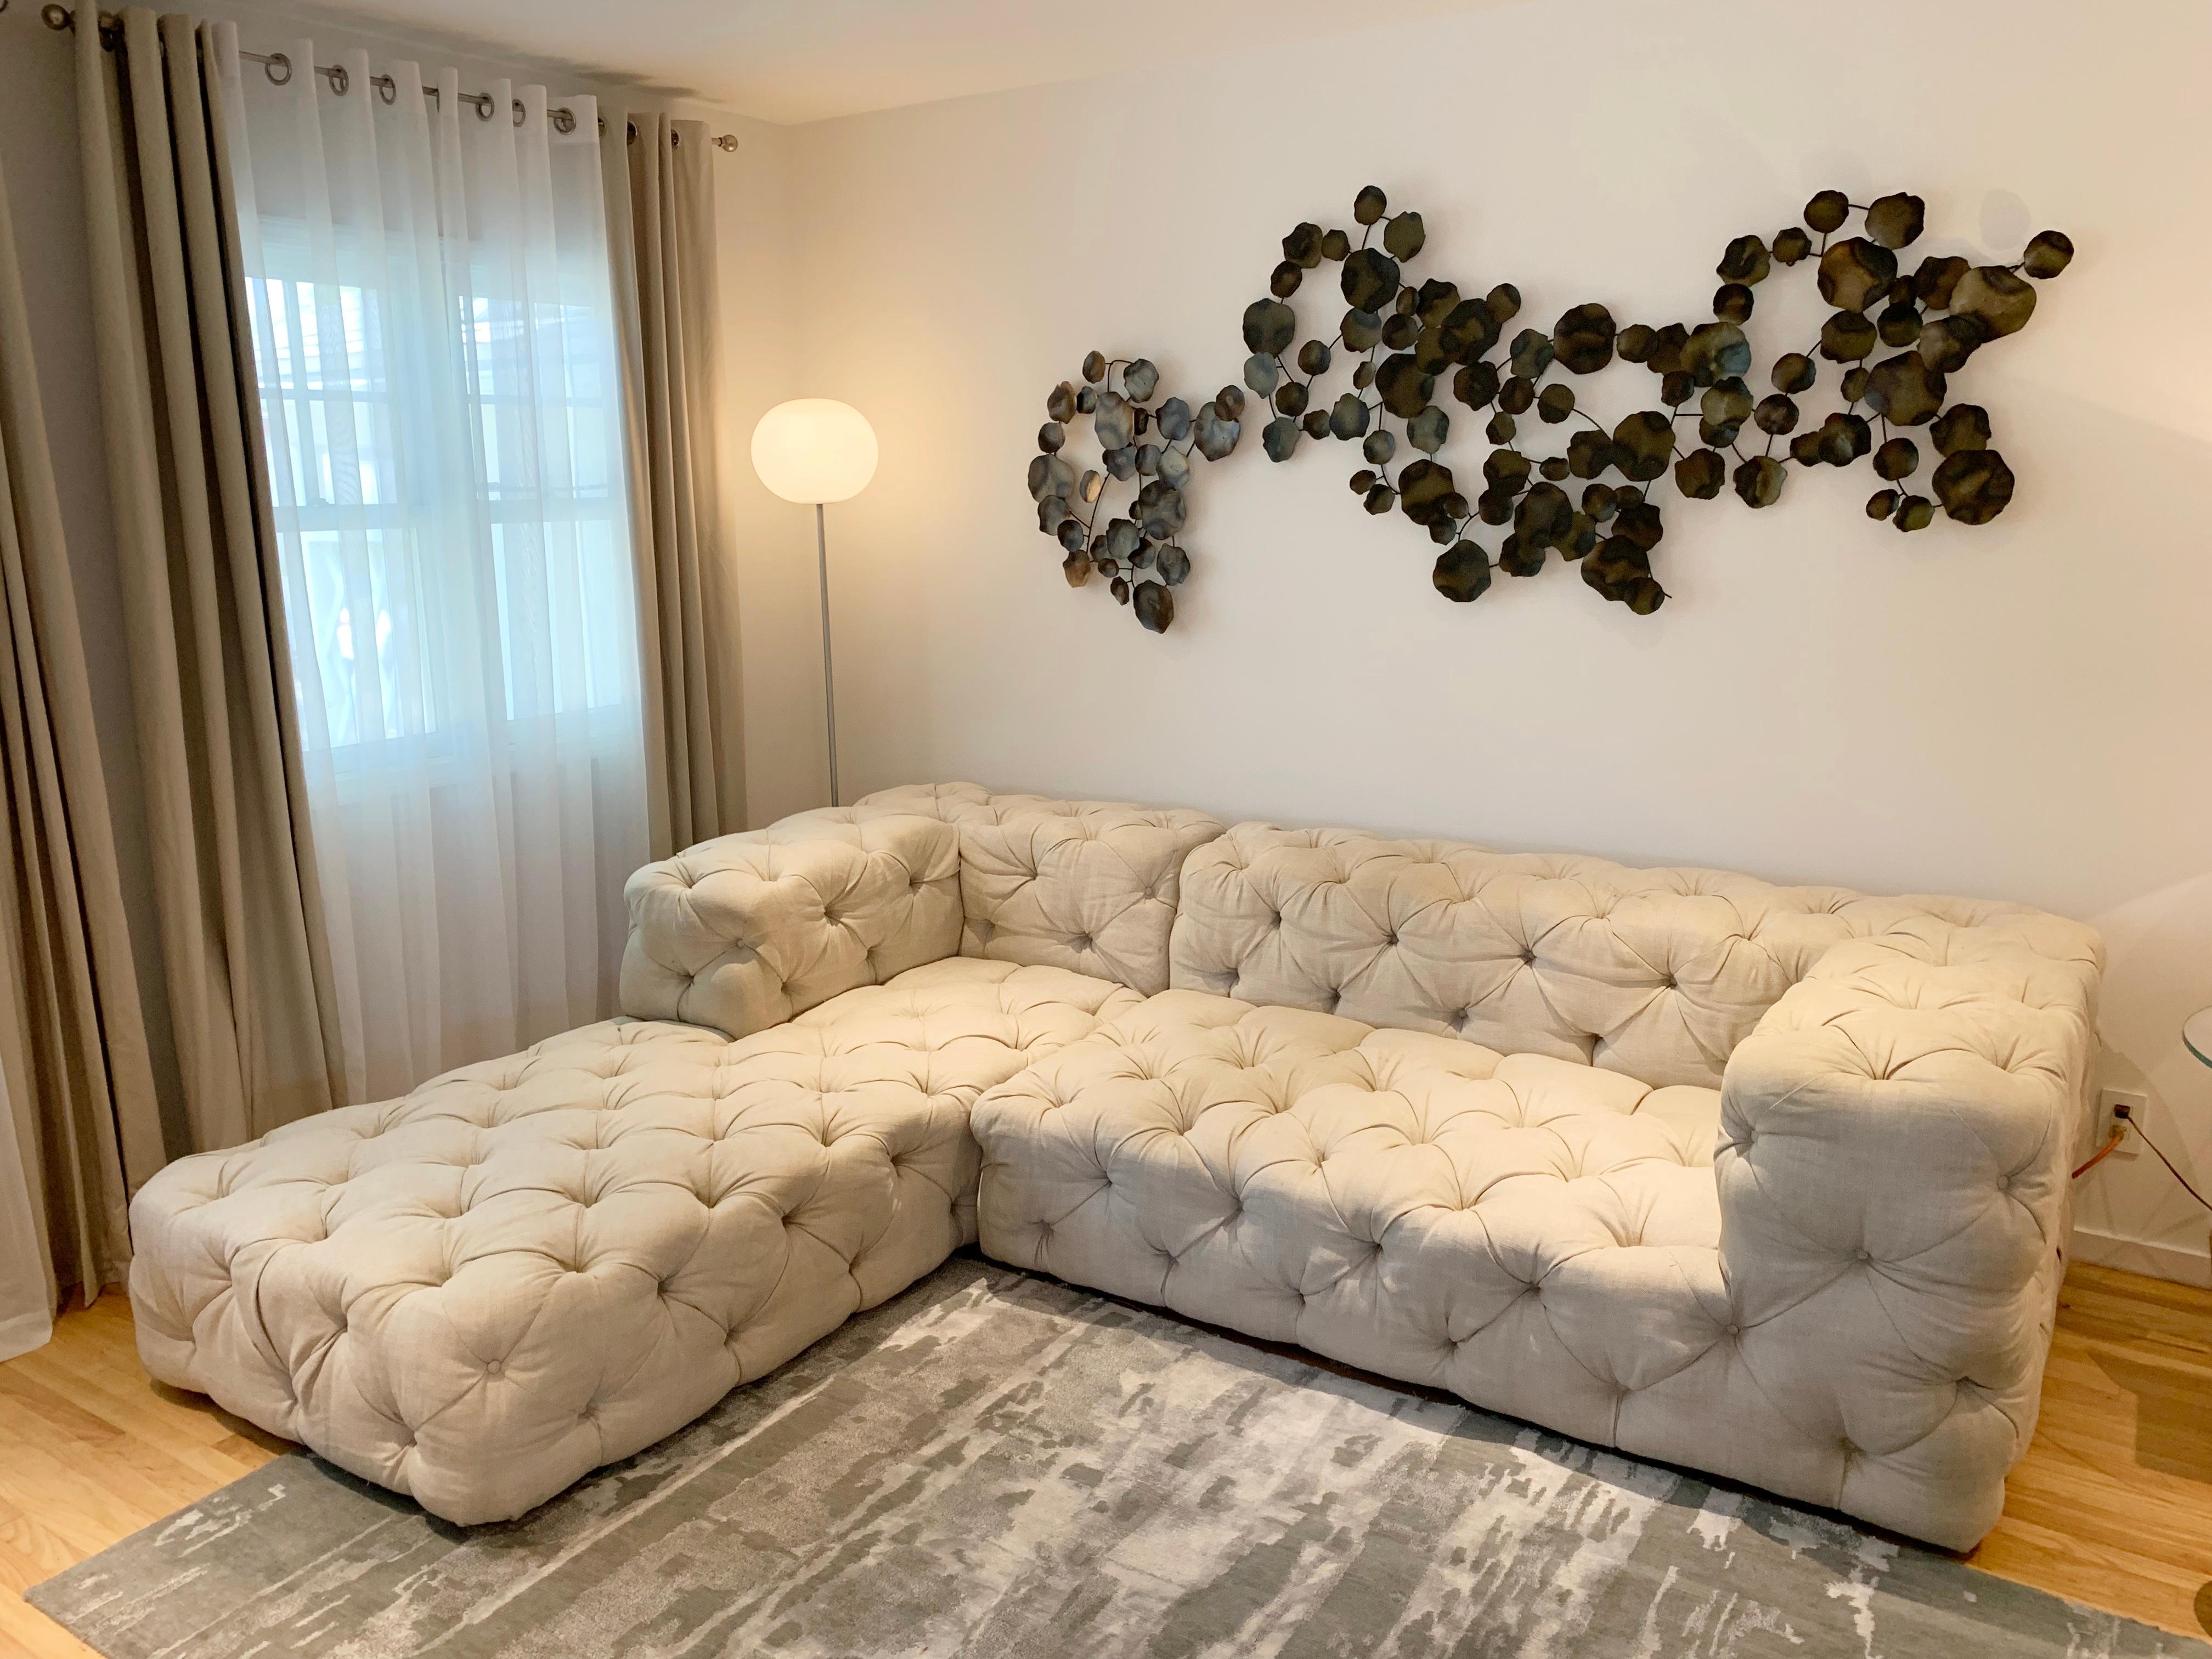 Beautiful deep tufted sectional sofa upholstered in cream colored linen fabric, excellent condition, beautifully made and ready to complete your project.
Piece with L shaped backrest
Measures: 6 feet wide x 46” deep x 29” high x 16” seat